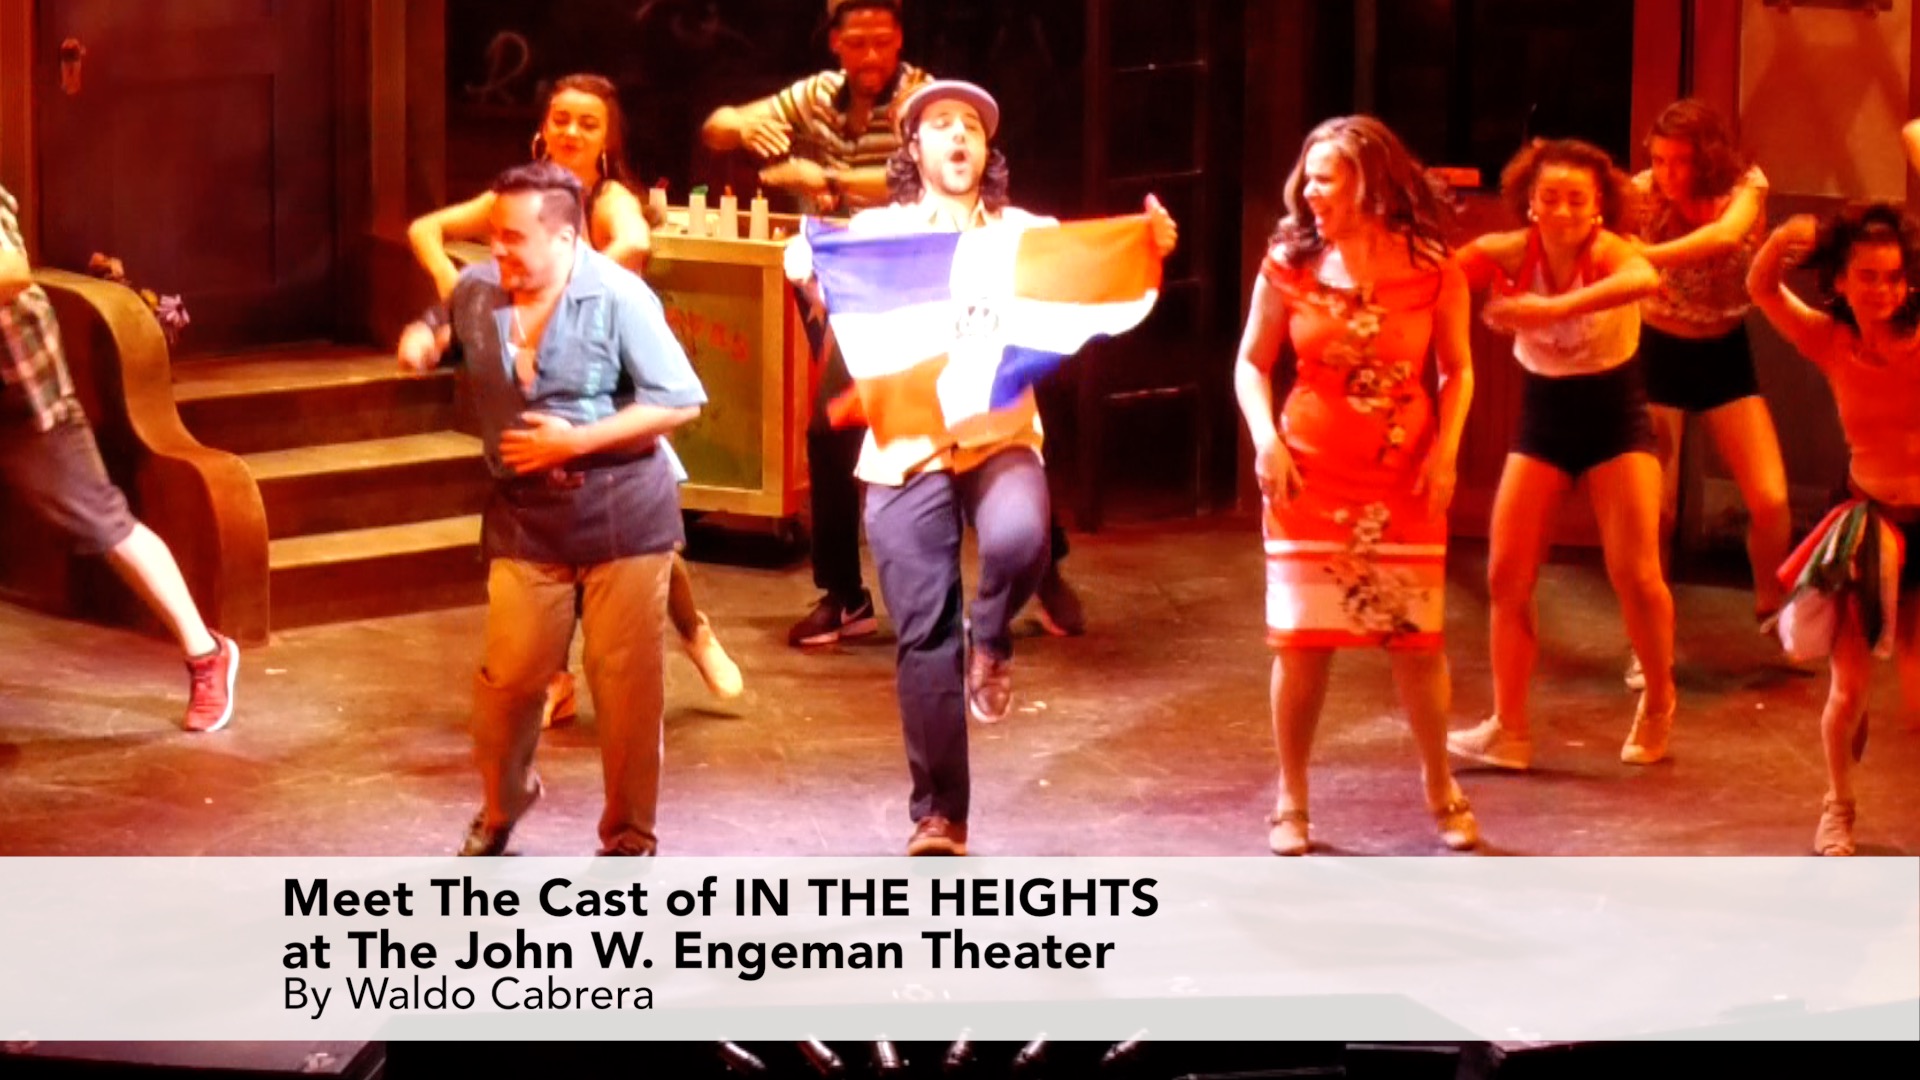 Meet The Cast of IN THE HEIGHTS at The John W. Engeman Theater